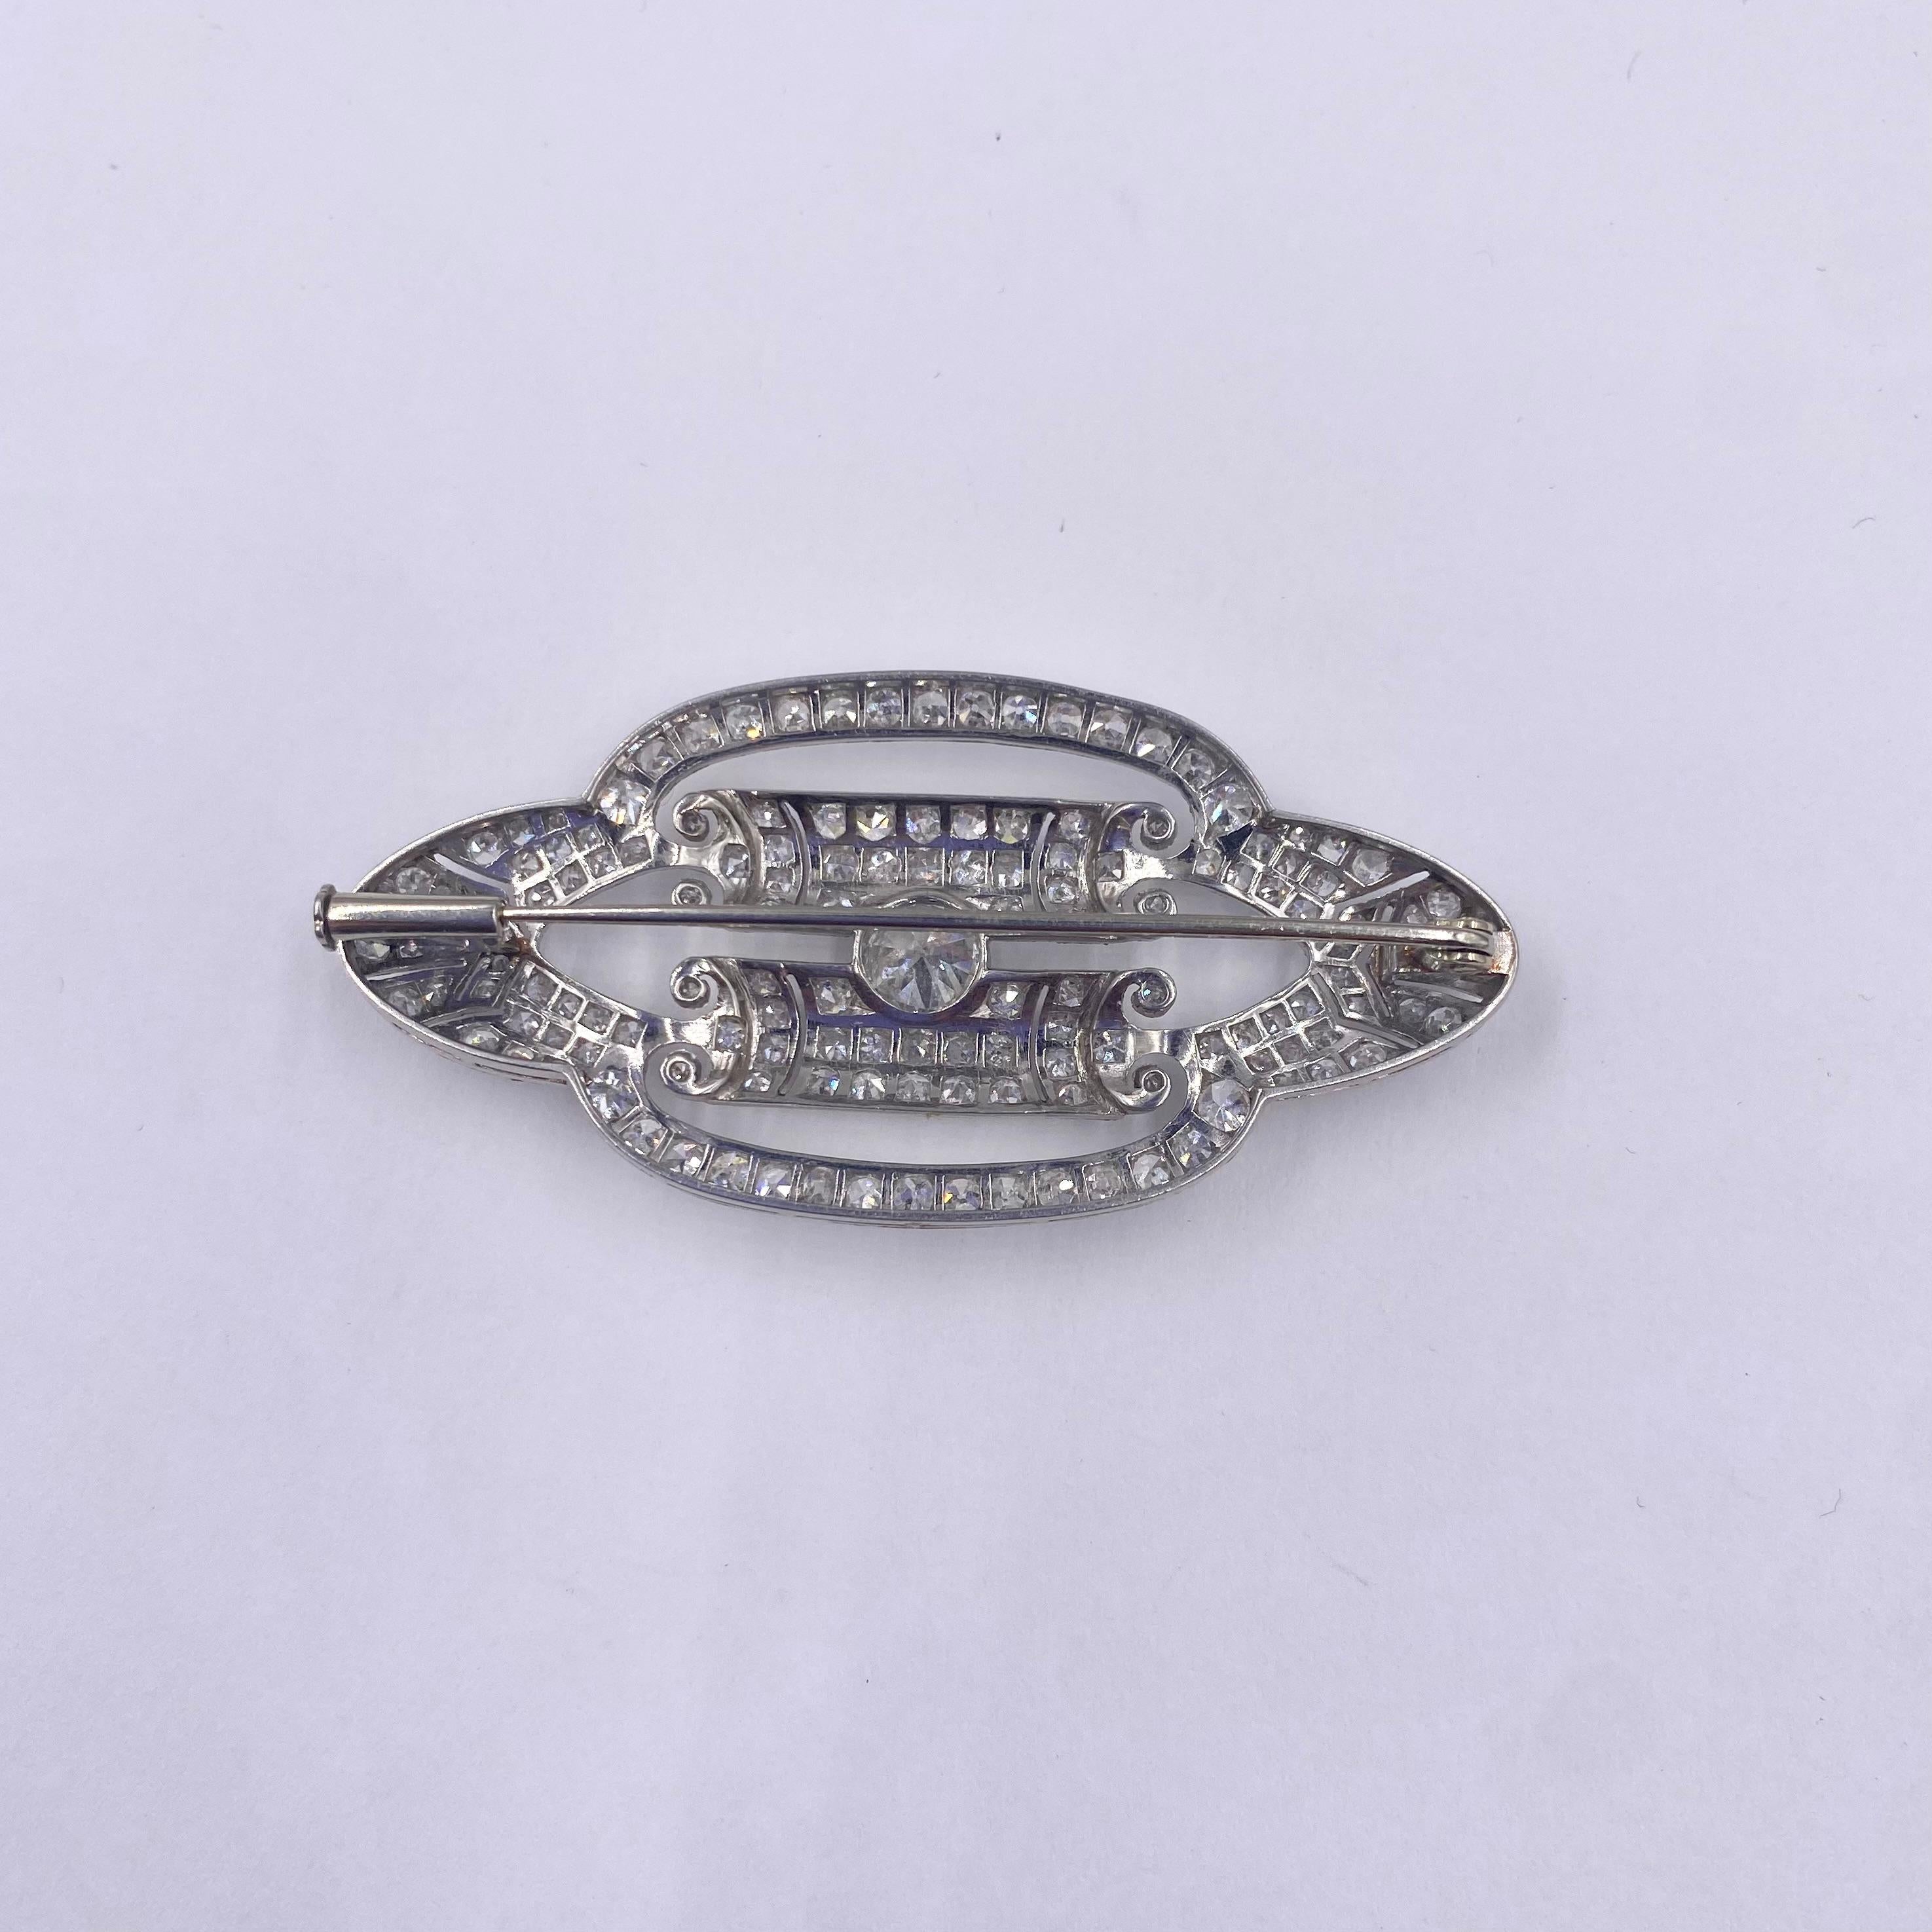 18K White gold Brooch. 

Brooch circa 1920 set with an old cut center diamond of approximately 0.90 Carats and approximately 3.00 Carats 8/8 cut diamonds ( H color - Vs clarity). 

Total Weight of diamonds: 3.90 Carats 